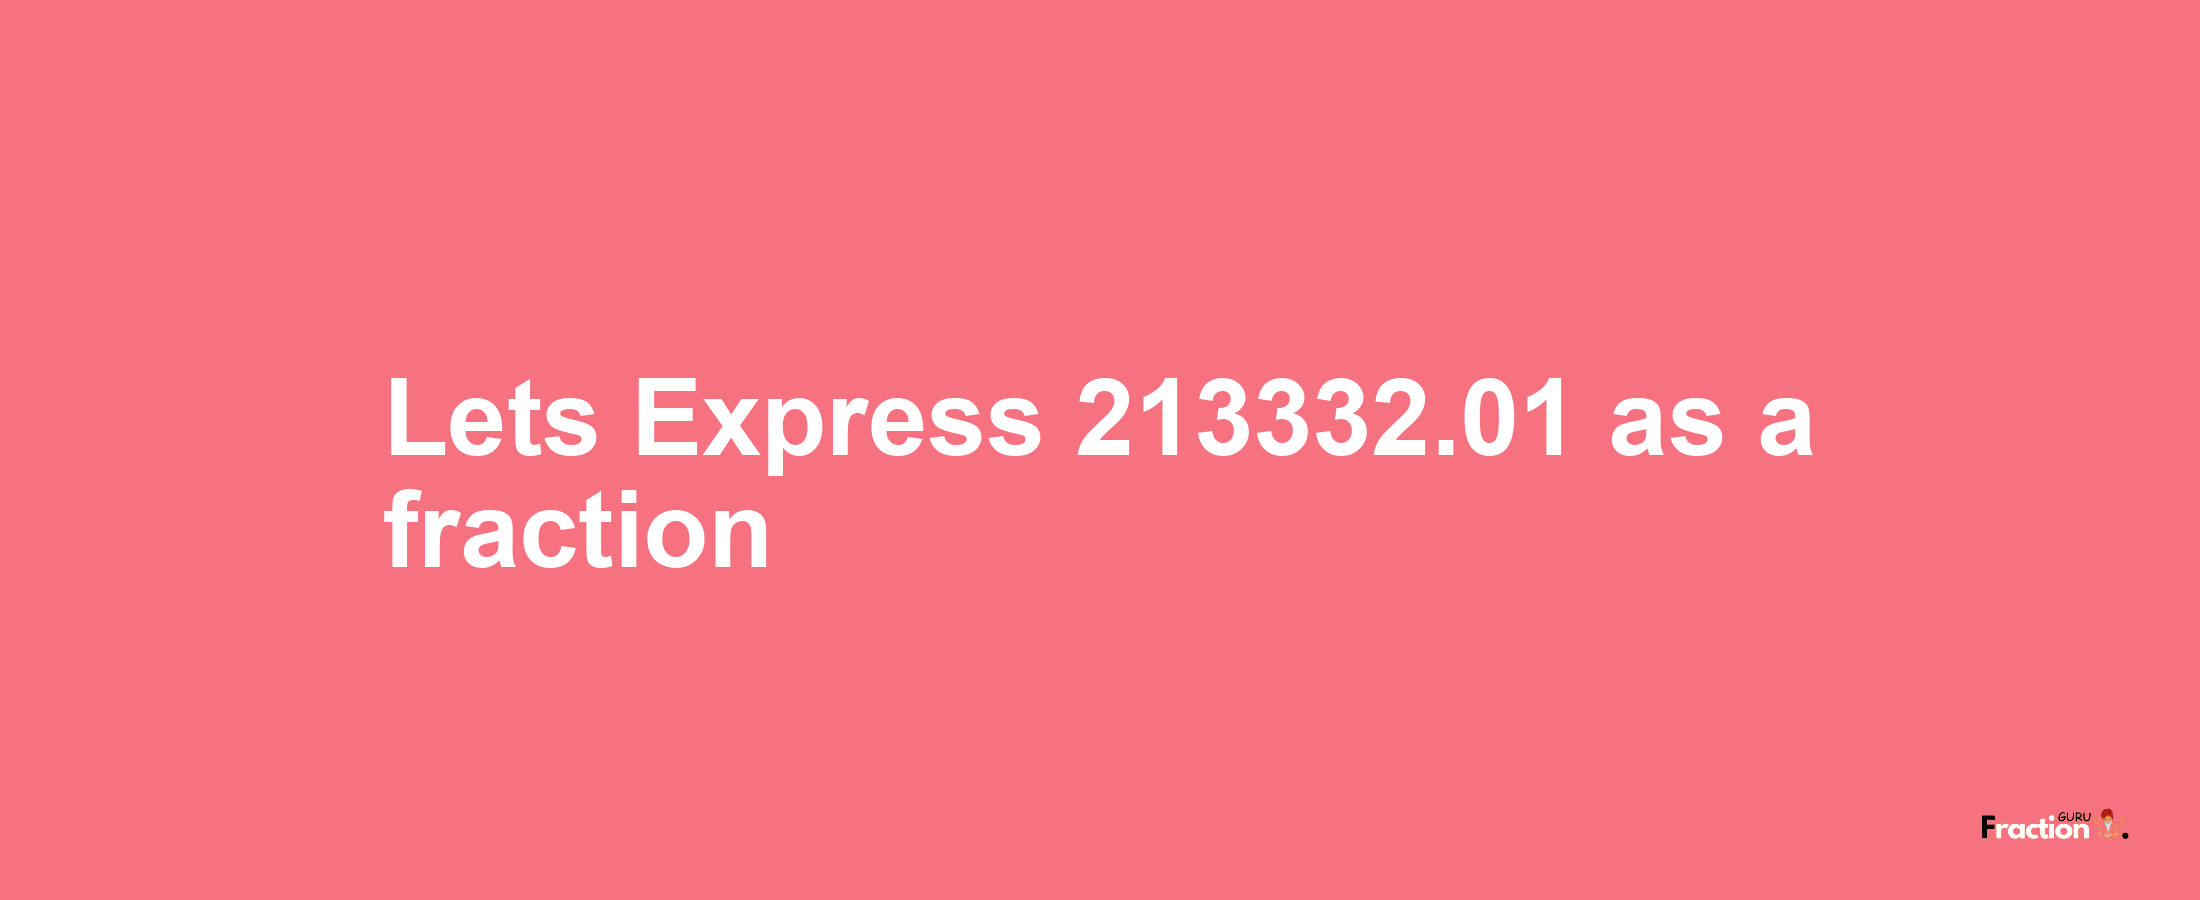 Lets Express 213332.01 as afraction